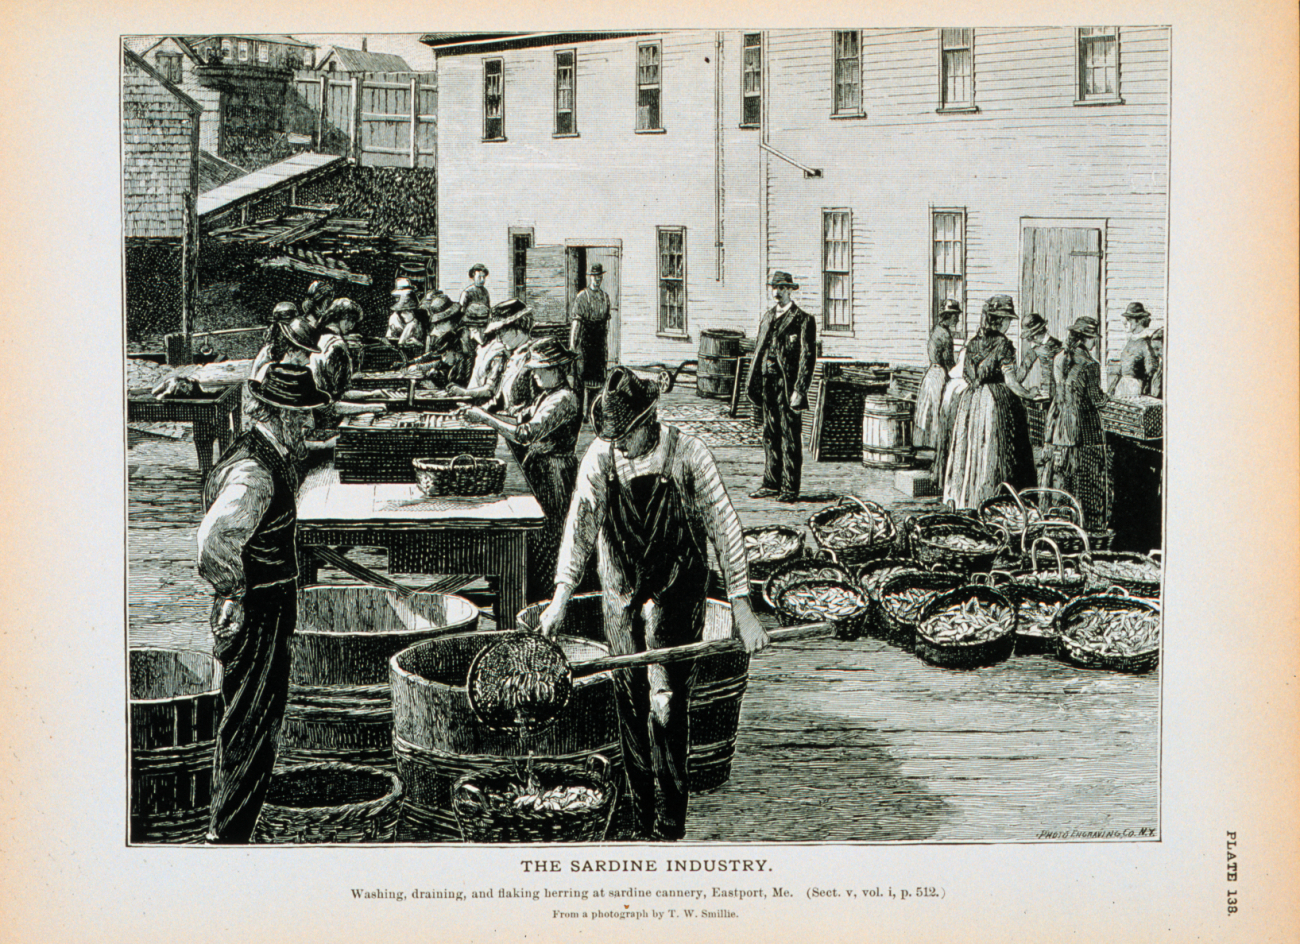 Washing, draining, and flaking herring at sardine cannery, Eastport, MaineFrom a photograph by T